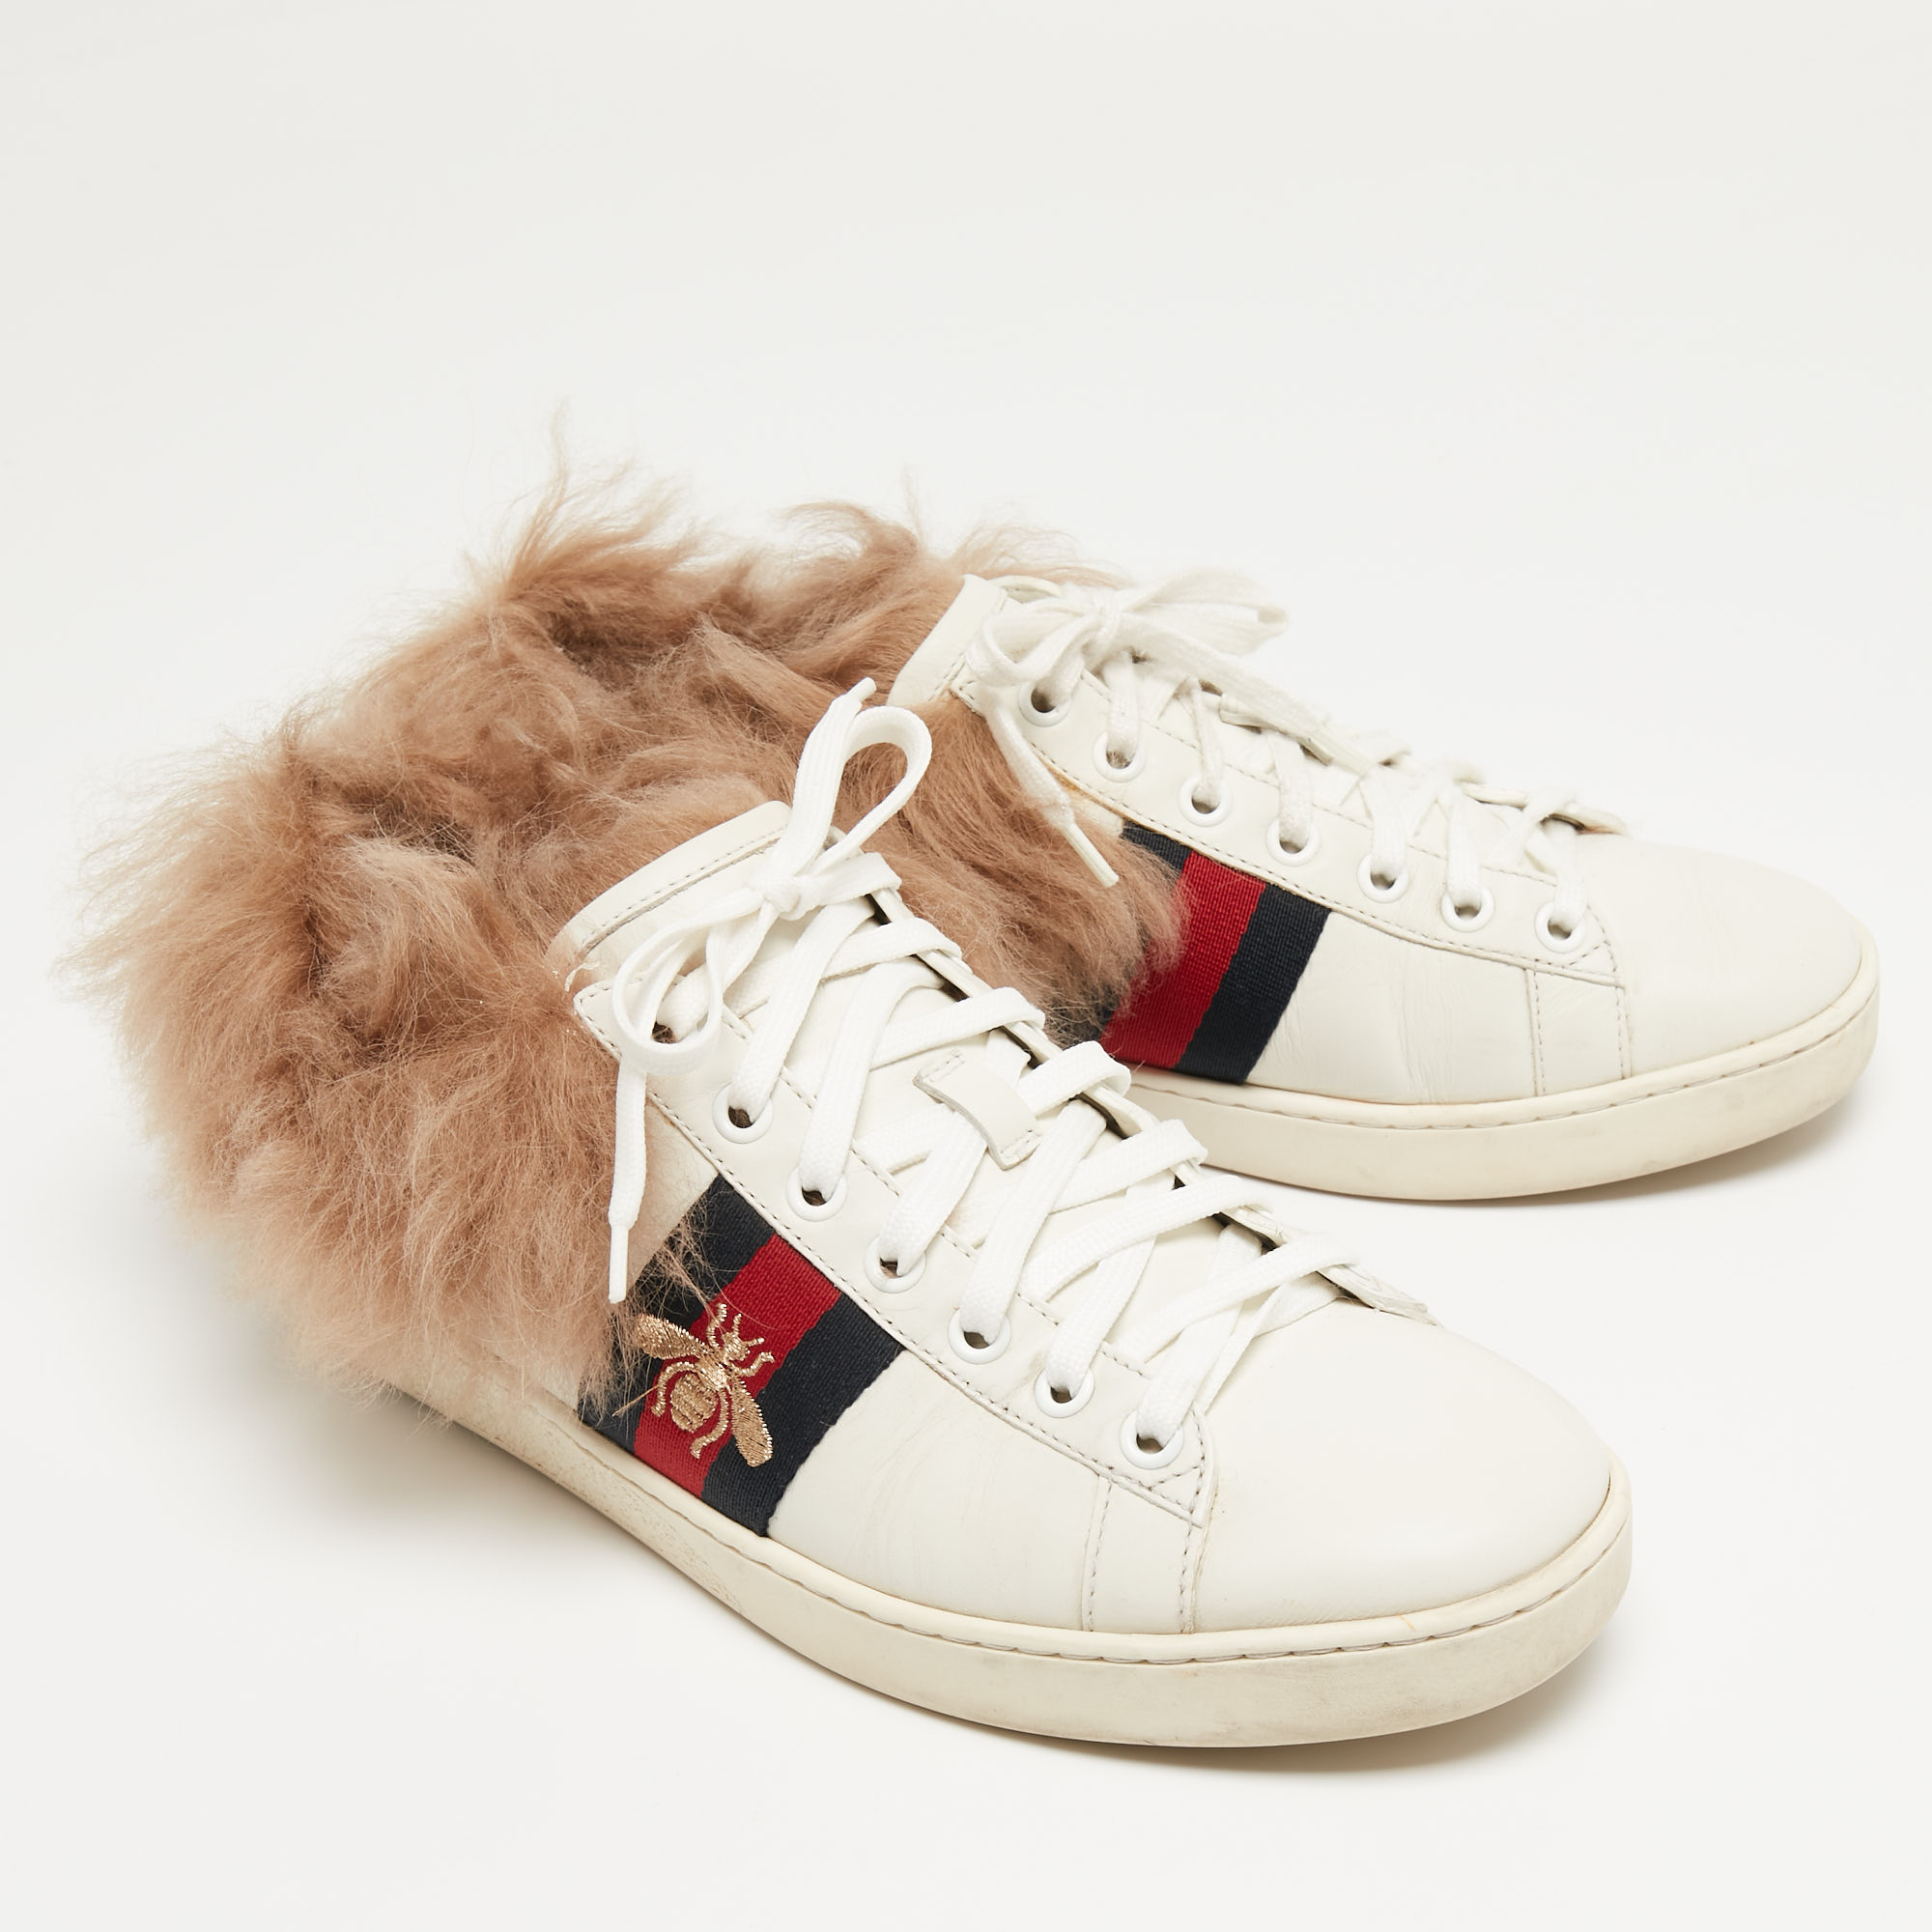 Gucci White Leather And Fur Ace Embroidered Bee Low Top Sneakers Size 37.5